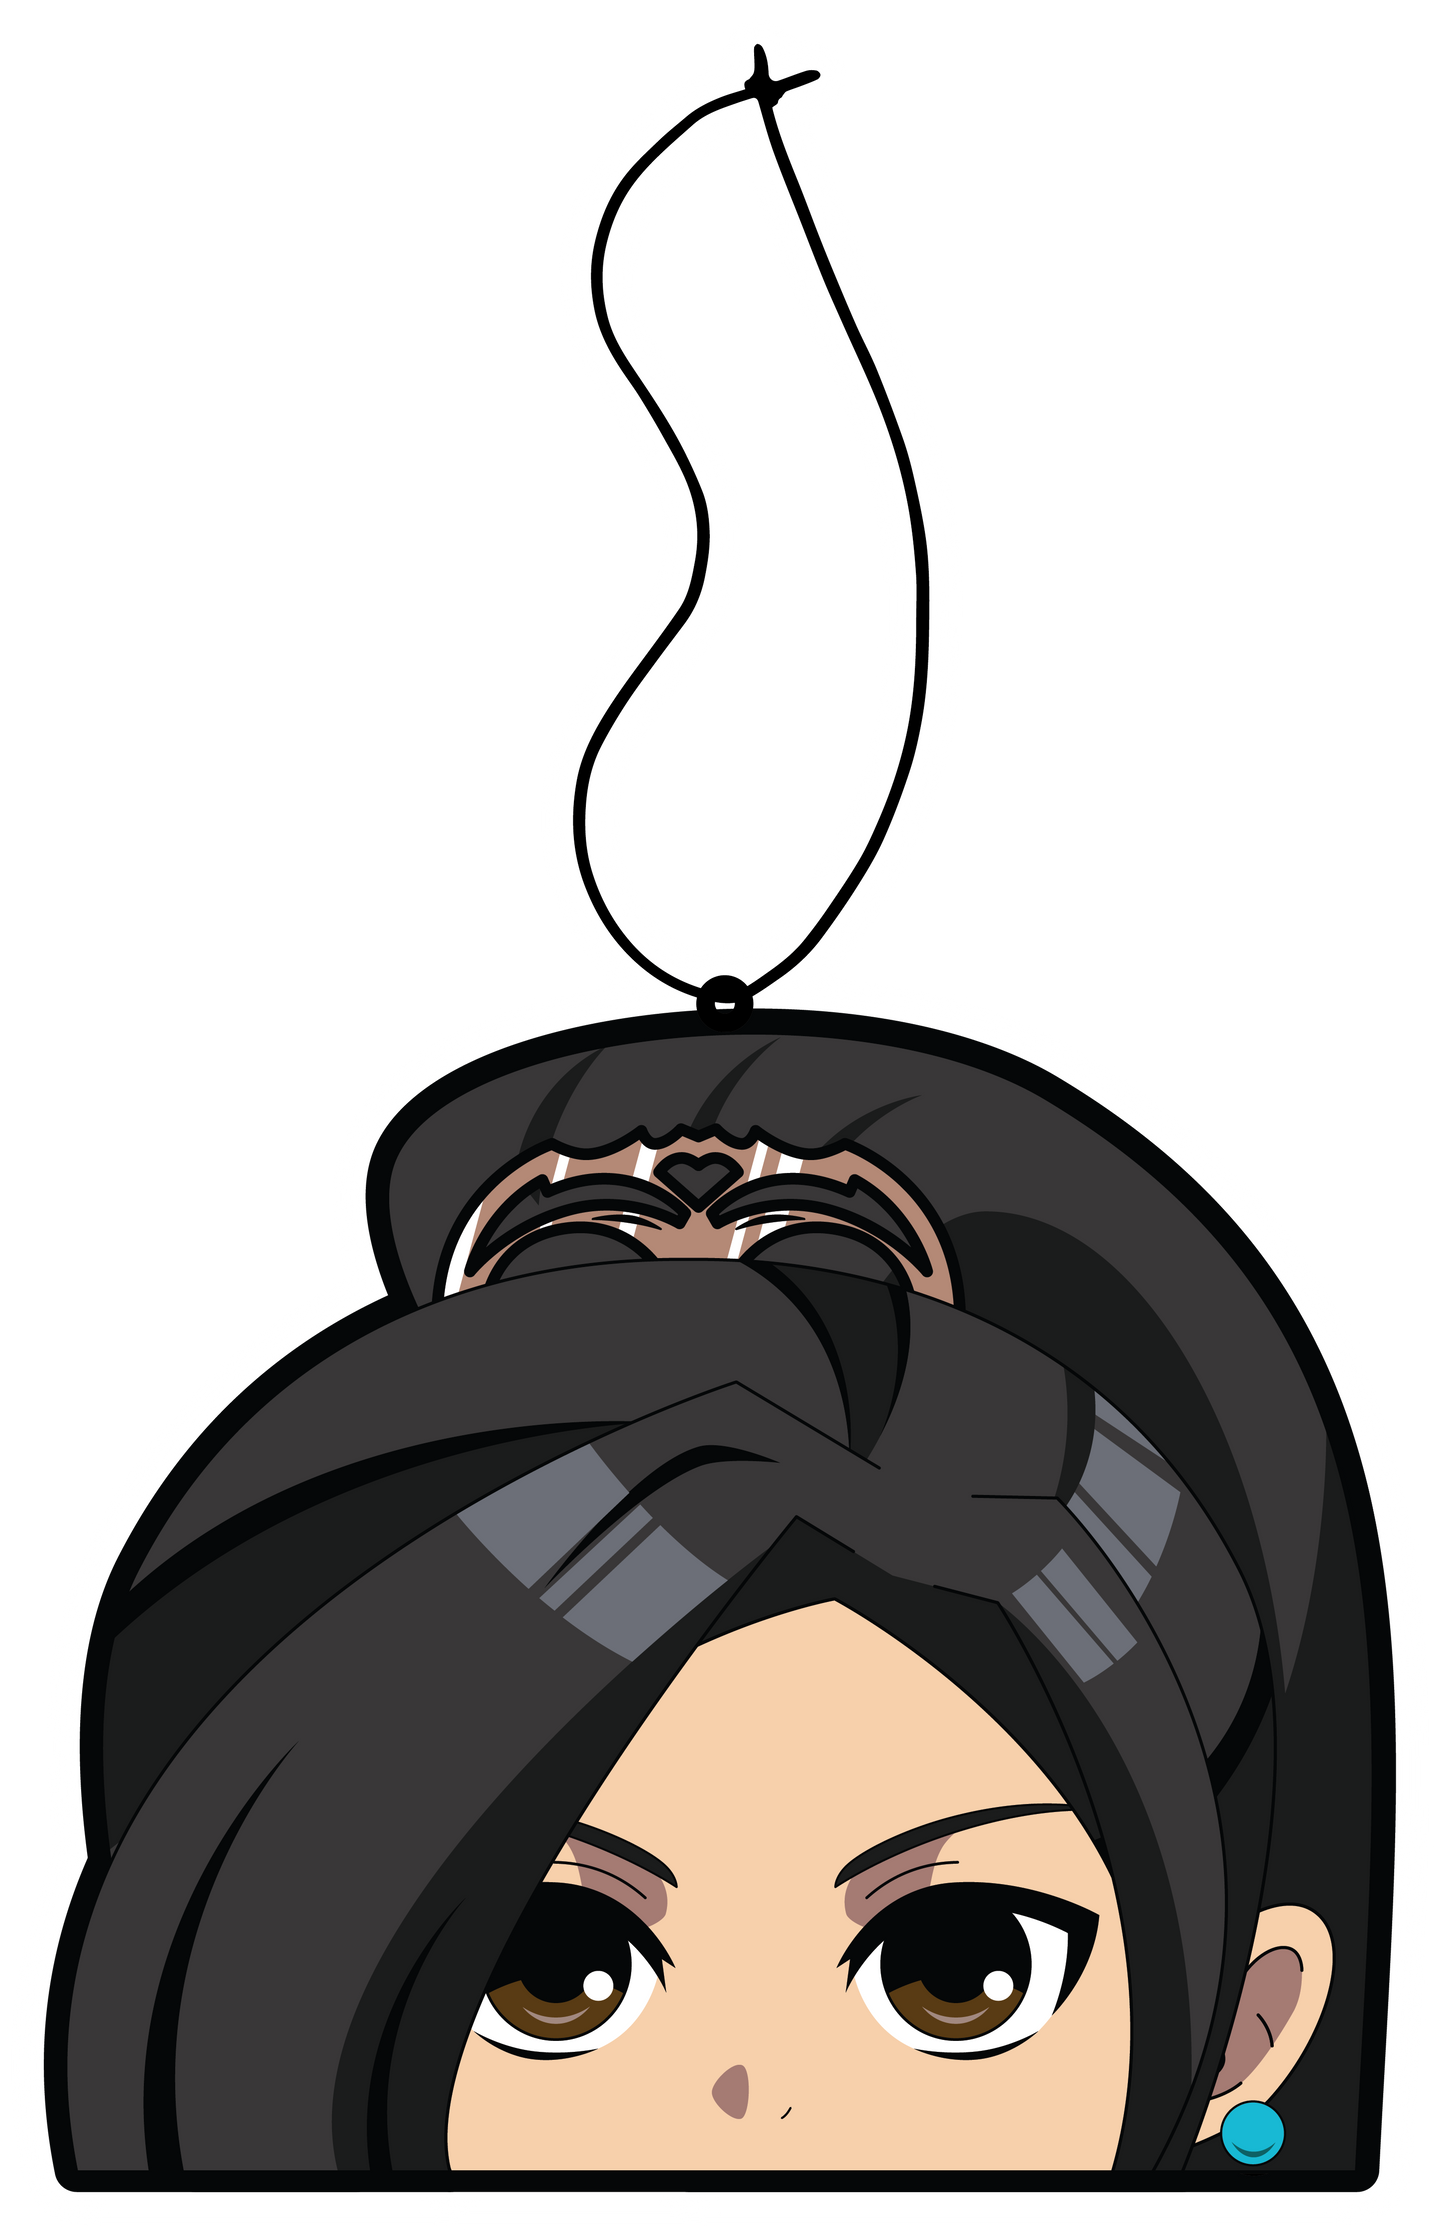 Anime Sage Character air freshener hanging from black string. Asian girl with high pony tail clip, brown eyes and blue pearl earring.